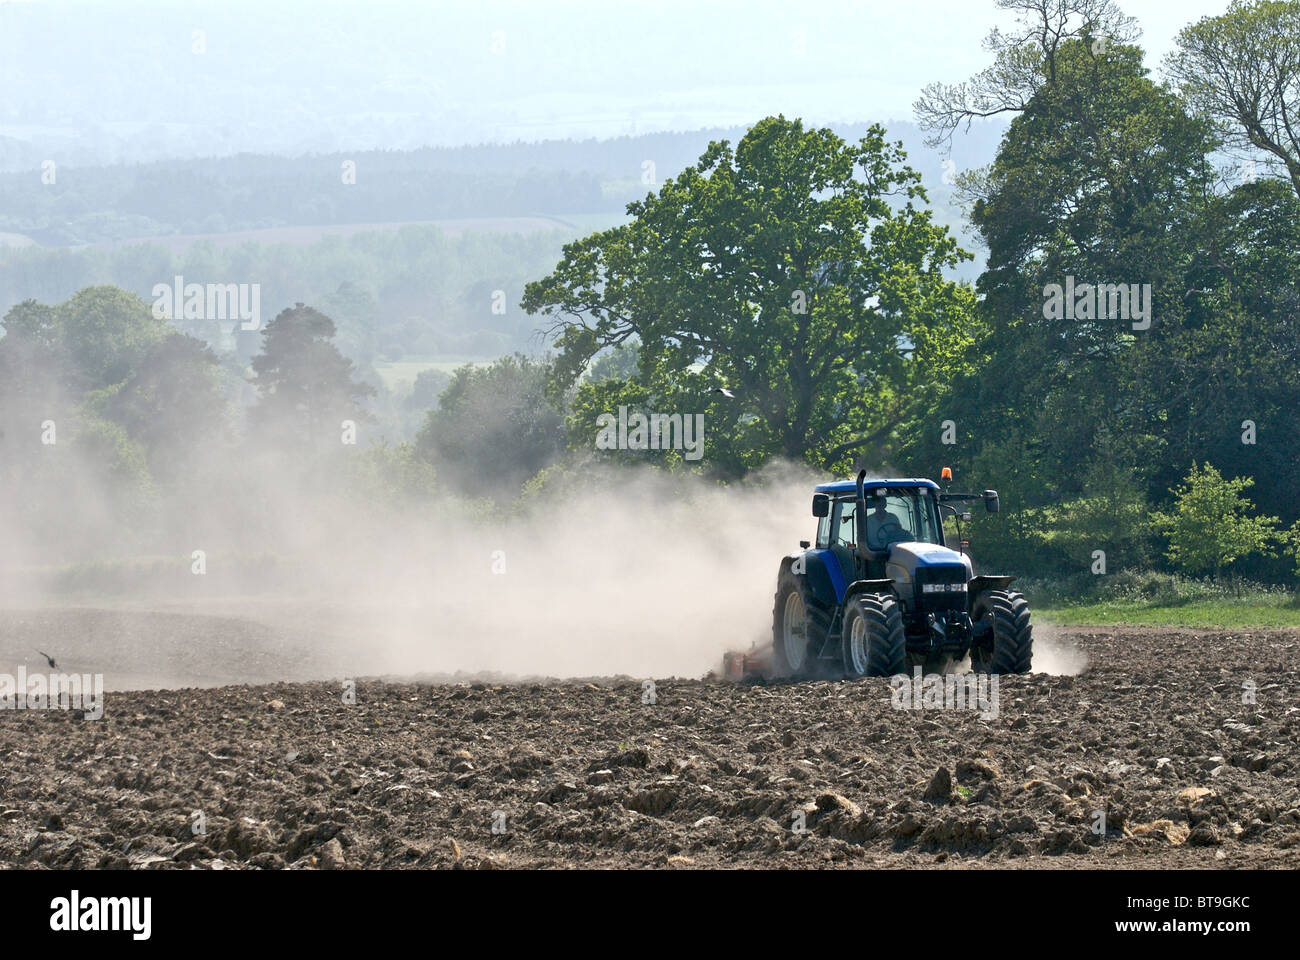 Tractor working on dry land in Sussex pulverising the soil and creating clouds of dust which is blown in the wind. Stock Photo